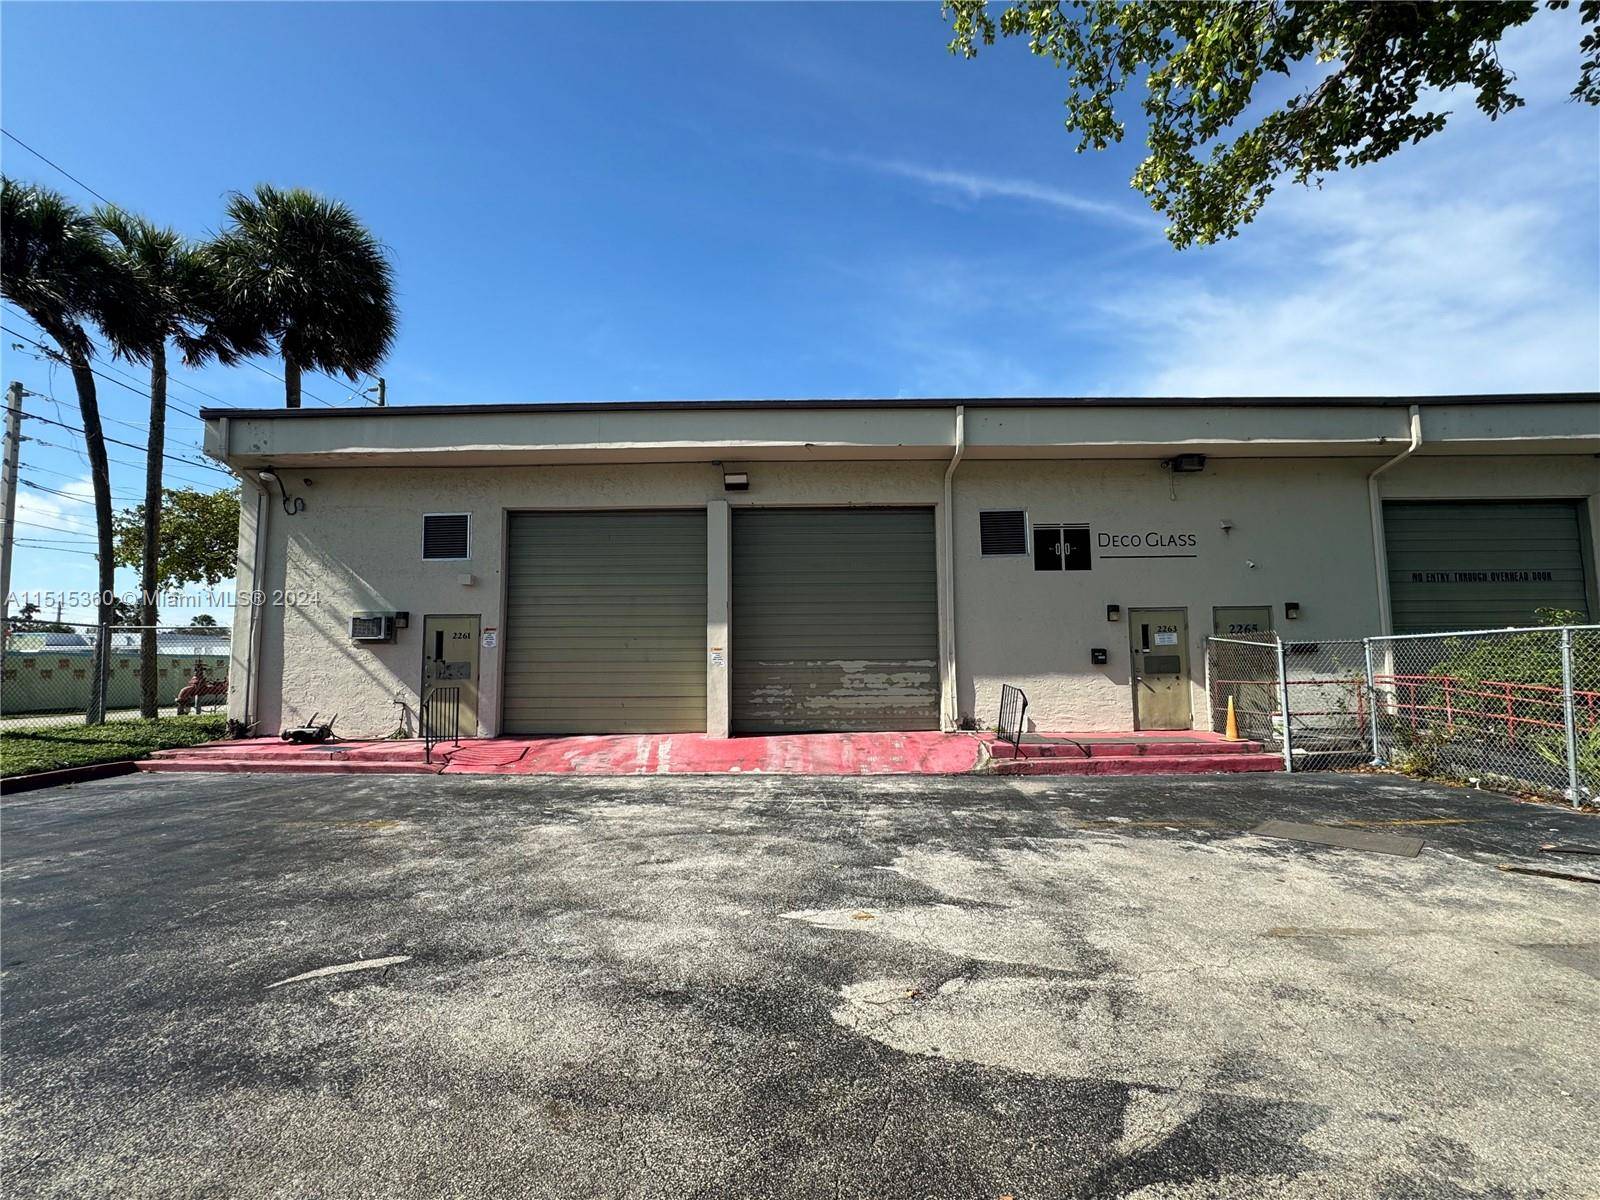 Large open warehouse space with 2 bathrooms and a portion of built out office space with central AC.